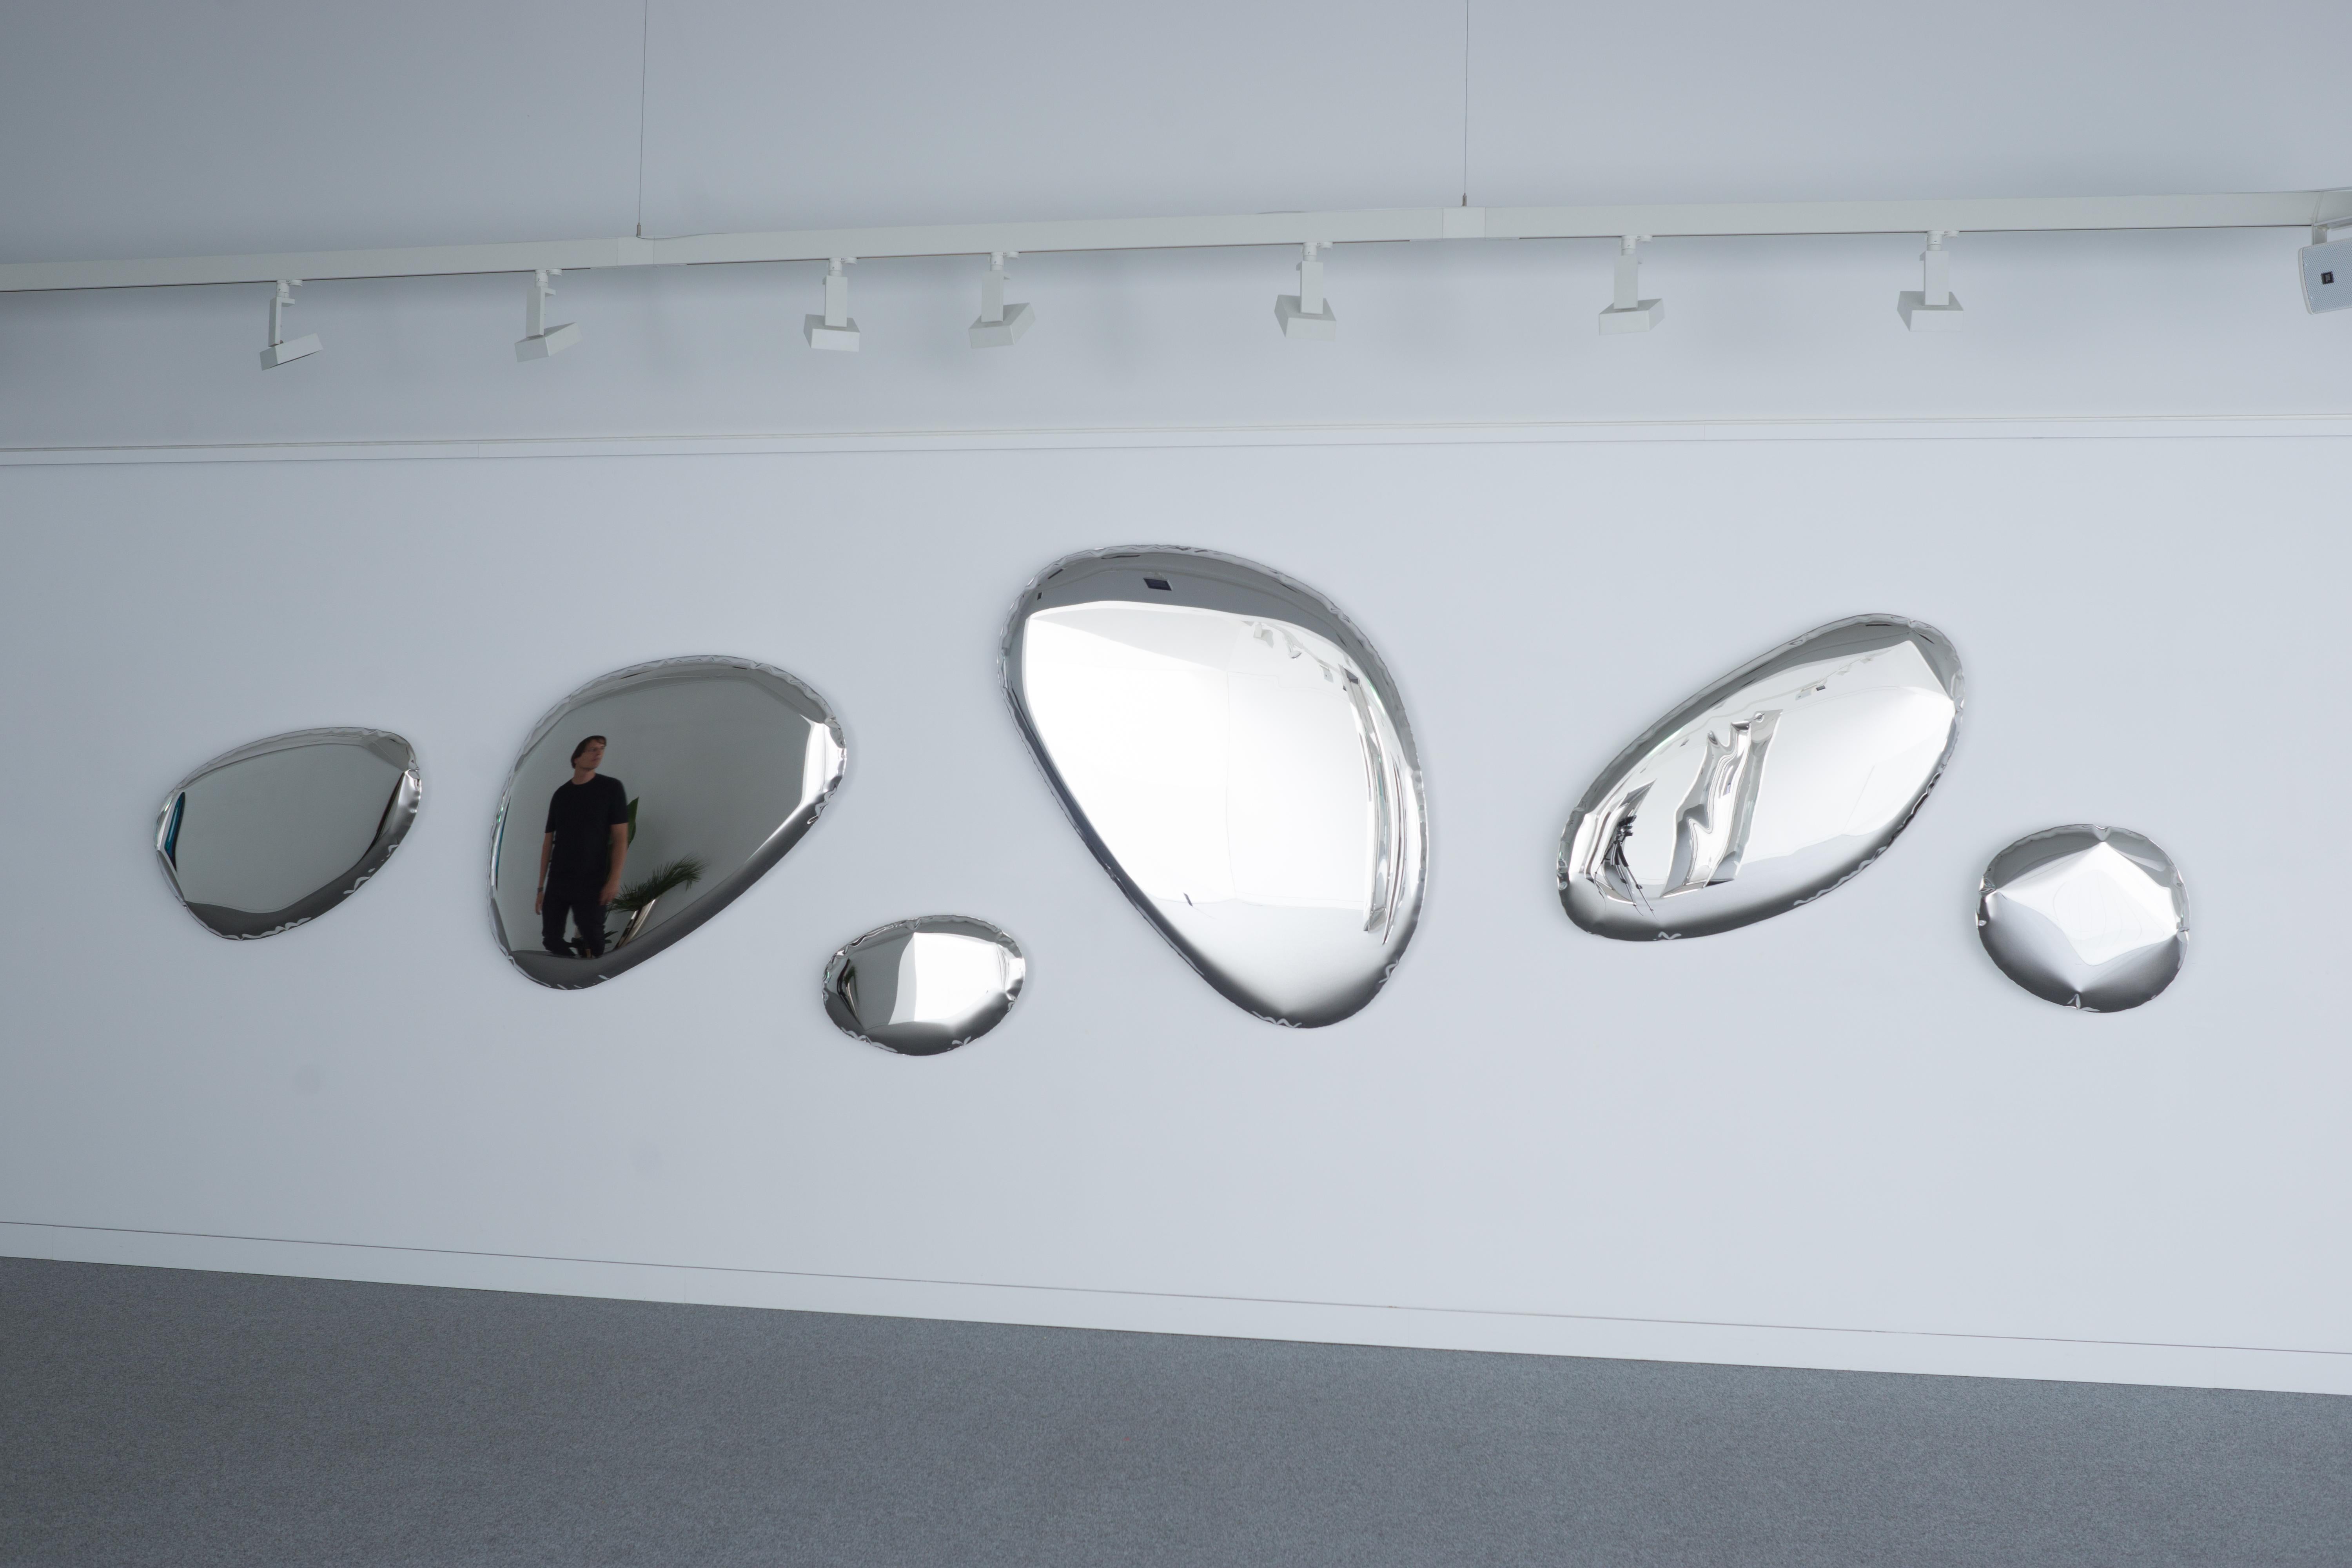 Tafla O1, Sculptural Wall Mirror, Gradient Collection, Zieta In New Condition For Sale In Geneve, CH